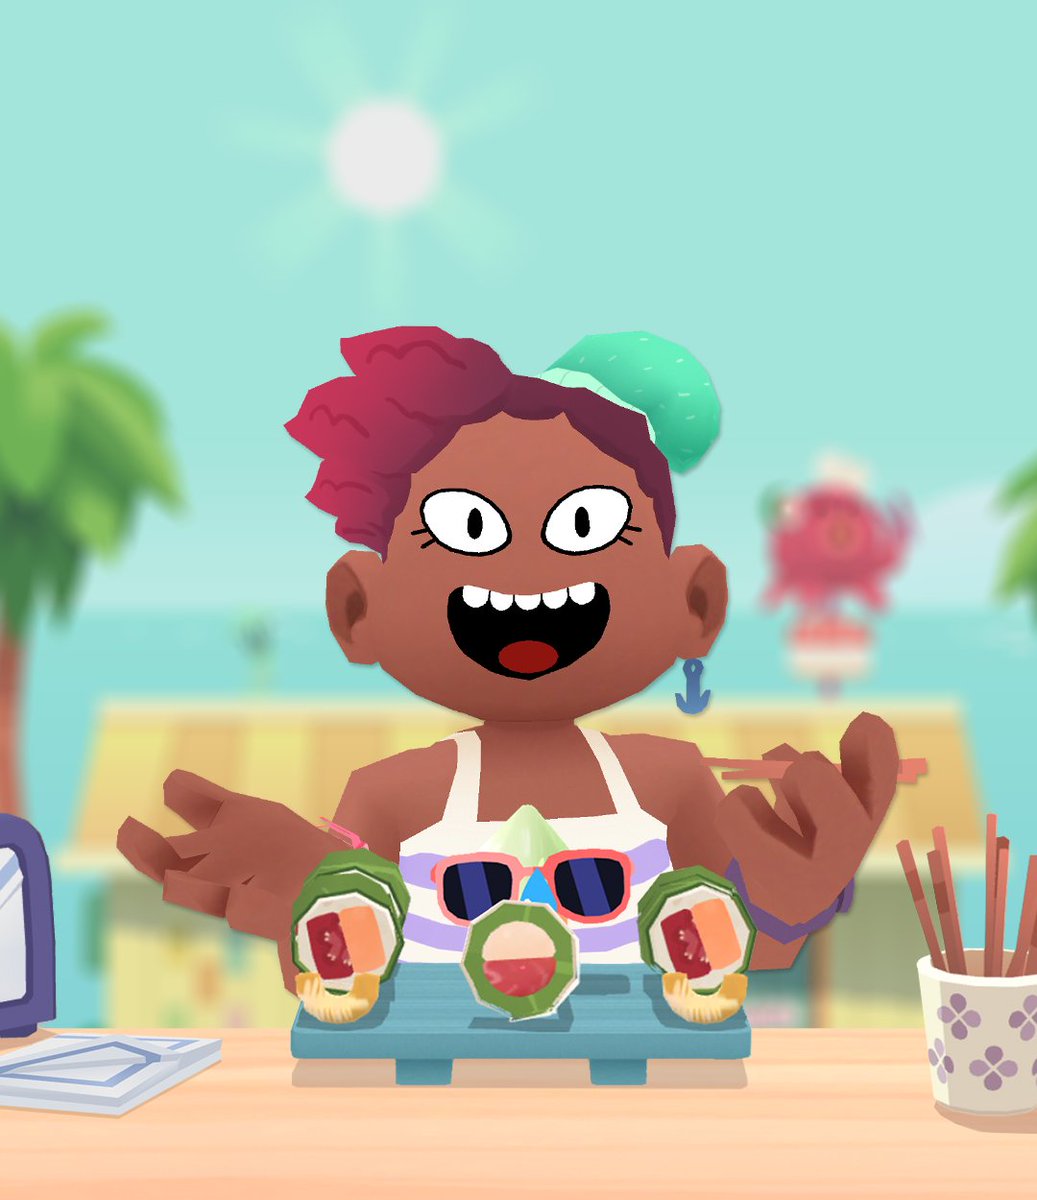 Toca Boca - IT'S O-FISH-AL 🍣 Toca Kitchen Sushi is ✨ OUT NOW ✨ on the App  Store, Google Play and  Appstore! App Store:   Google Play:   Appstore